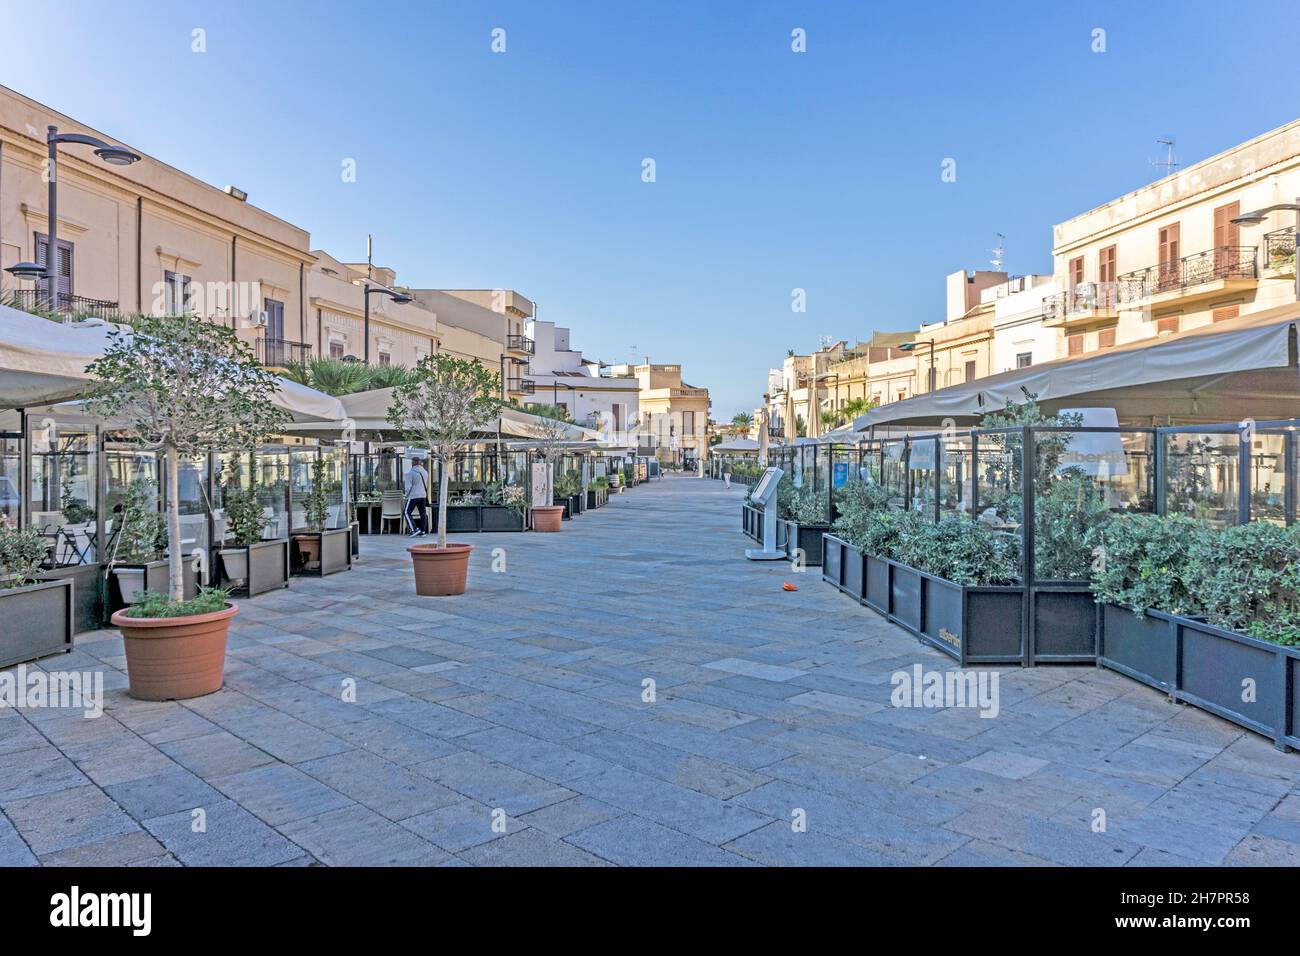 The Piazza Duomo in Terrasini, Sicily, Italy. The central square in the town and the main hospitality area. Stock Photo